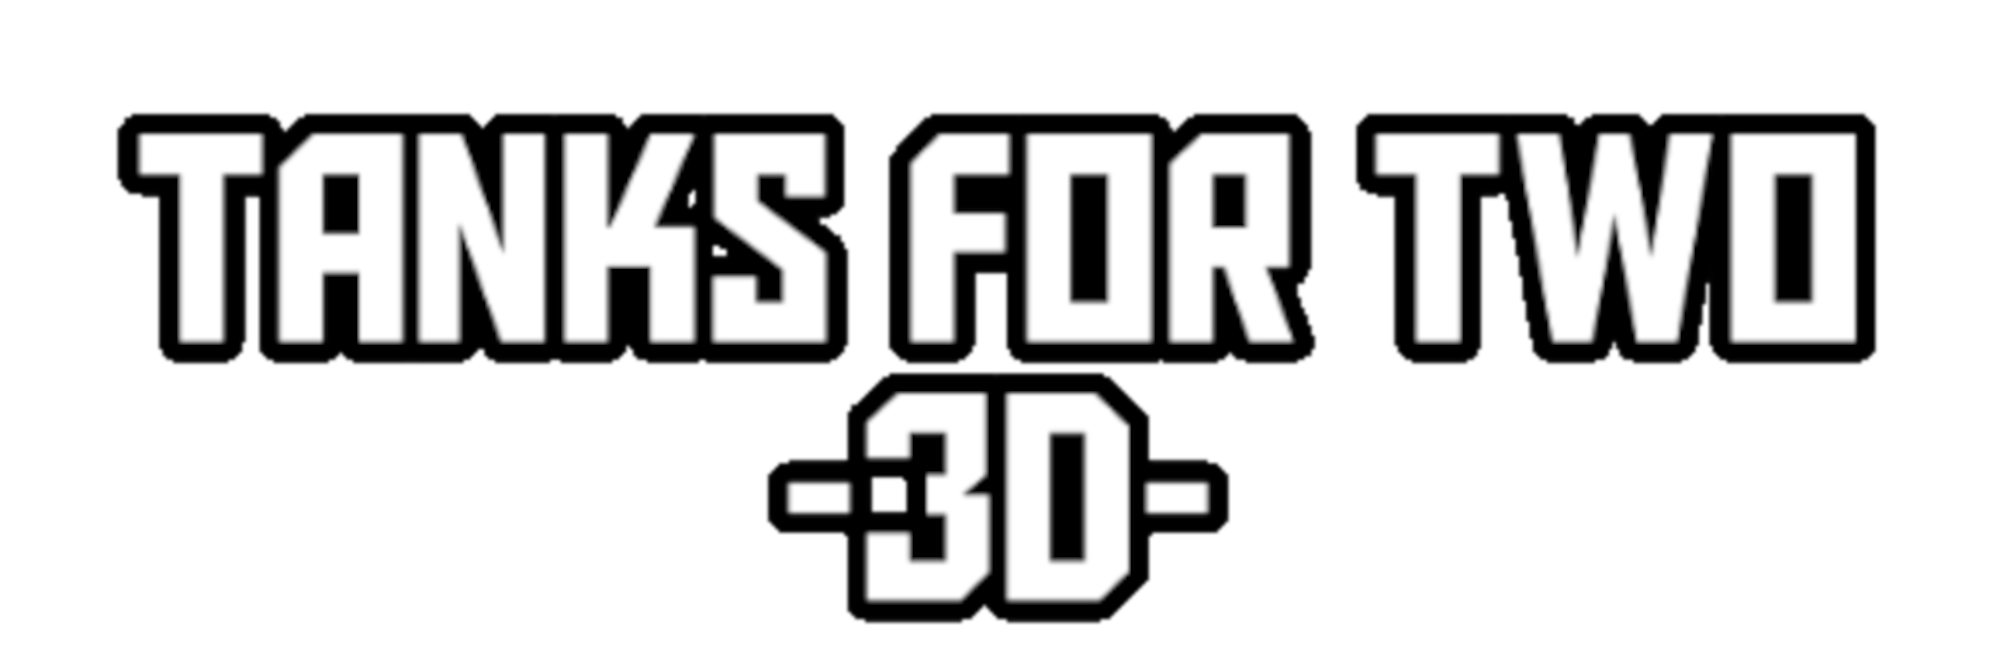 Tanks For Two - 3D